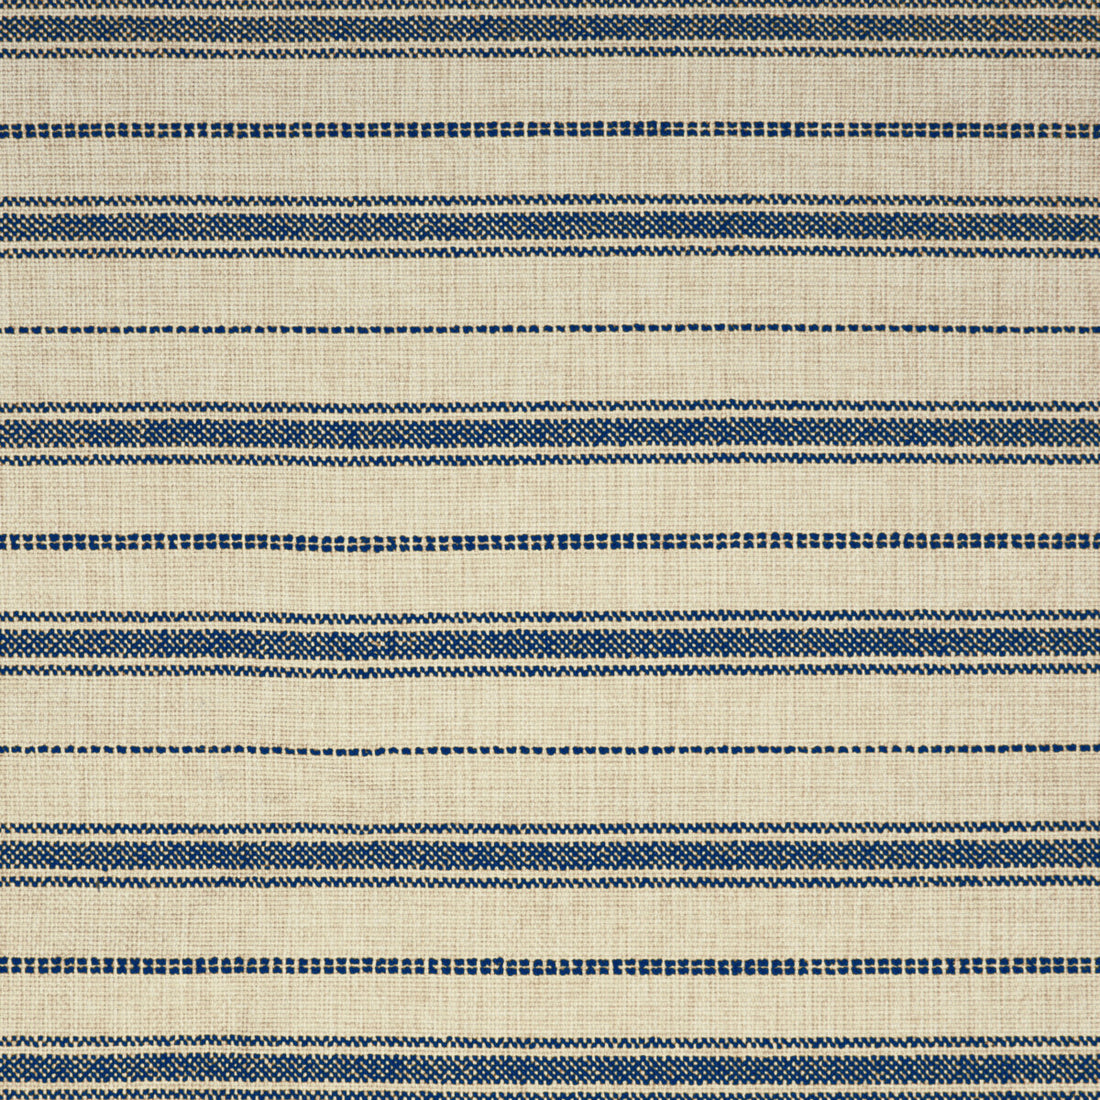 Montpezat Stripe fabric in navy color - pattern 8020136.50.0 - by Brunschwig &amp; Fils in the En Vacances II collection